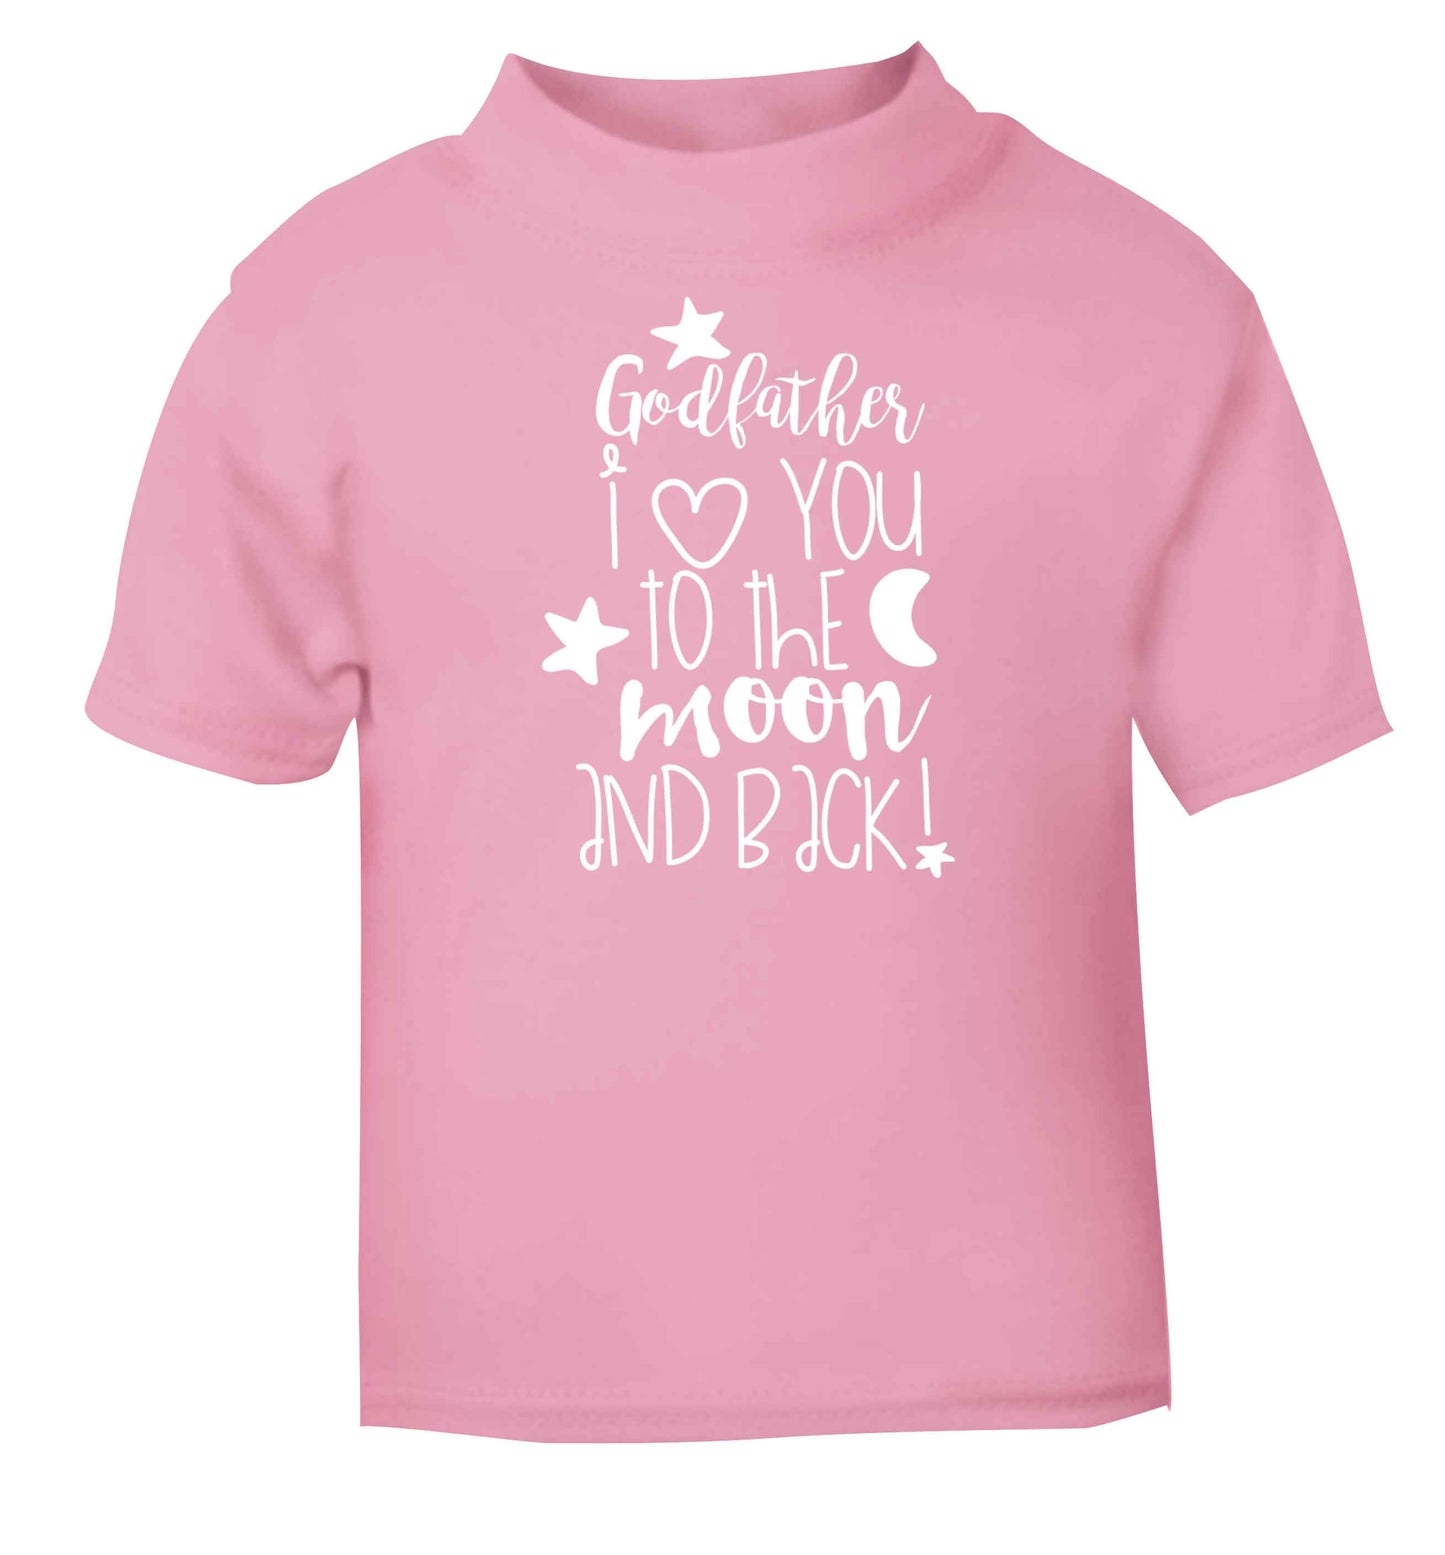 Godfather I love you to the moon and back light pink baby toddler Tshirt 2 Years